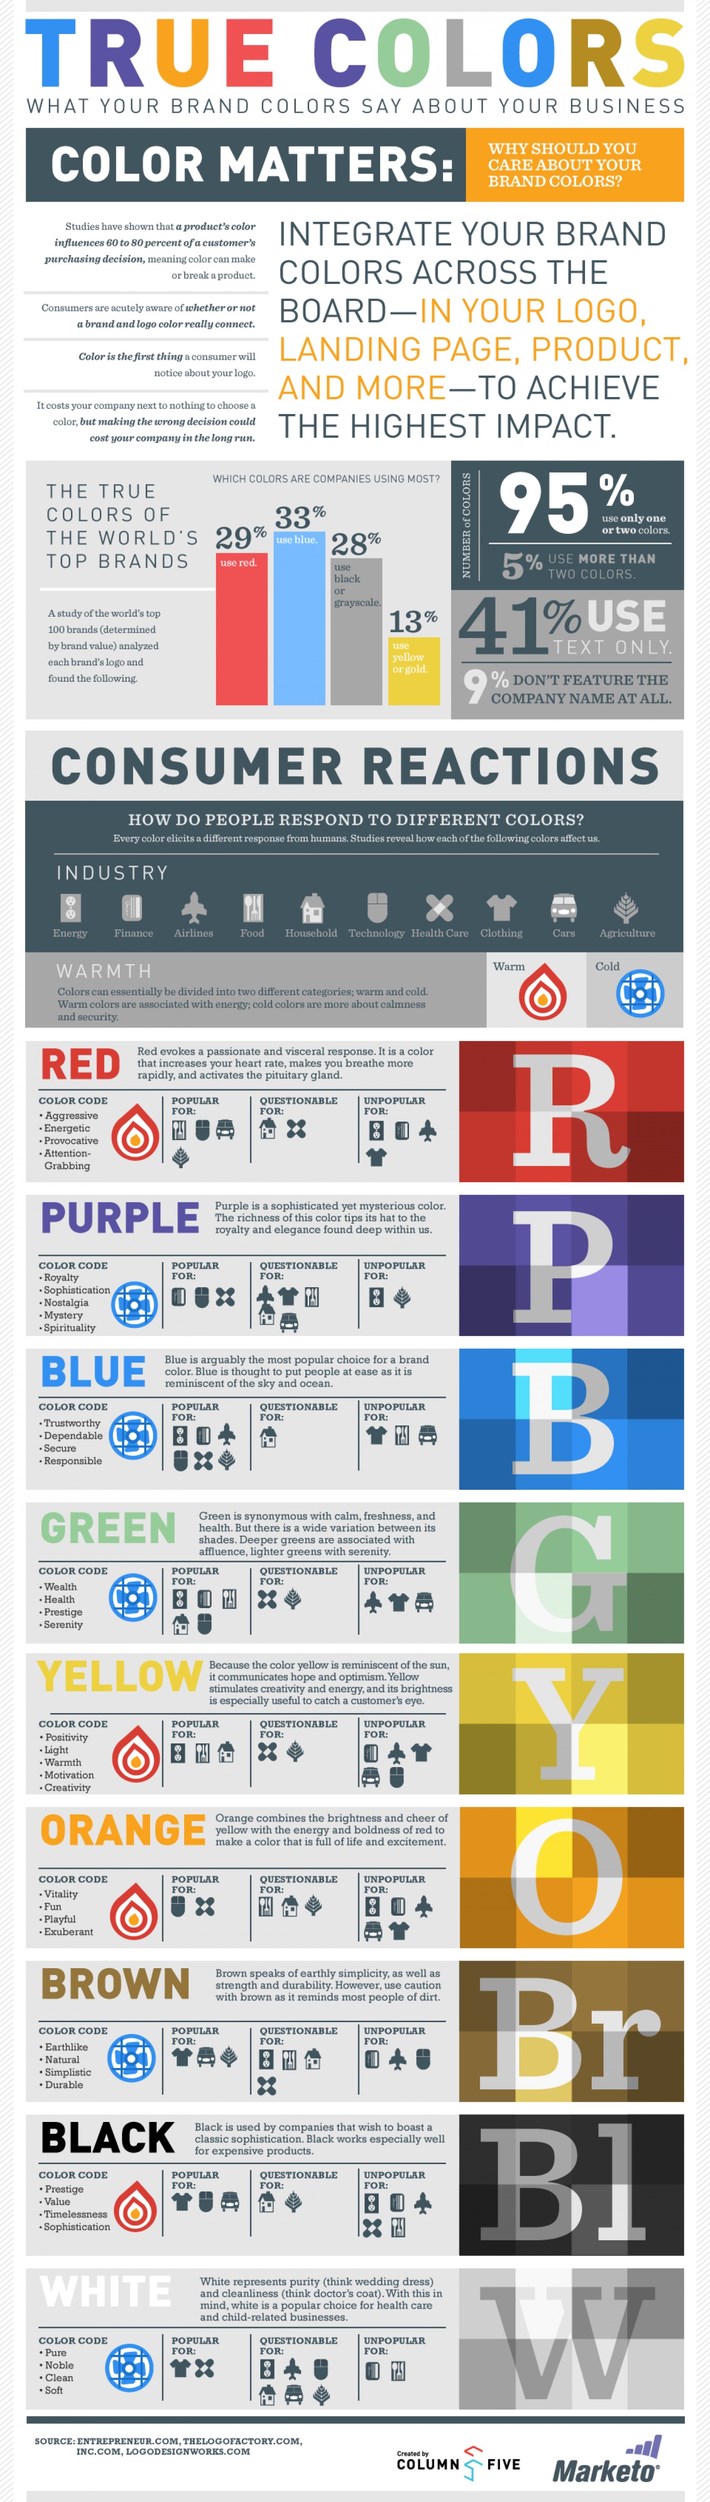 true-colors-what-your-brand-colors-say-about-your-business